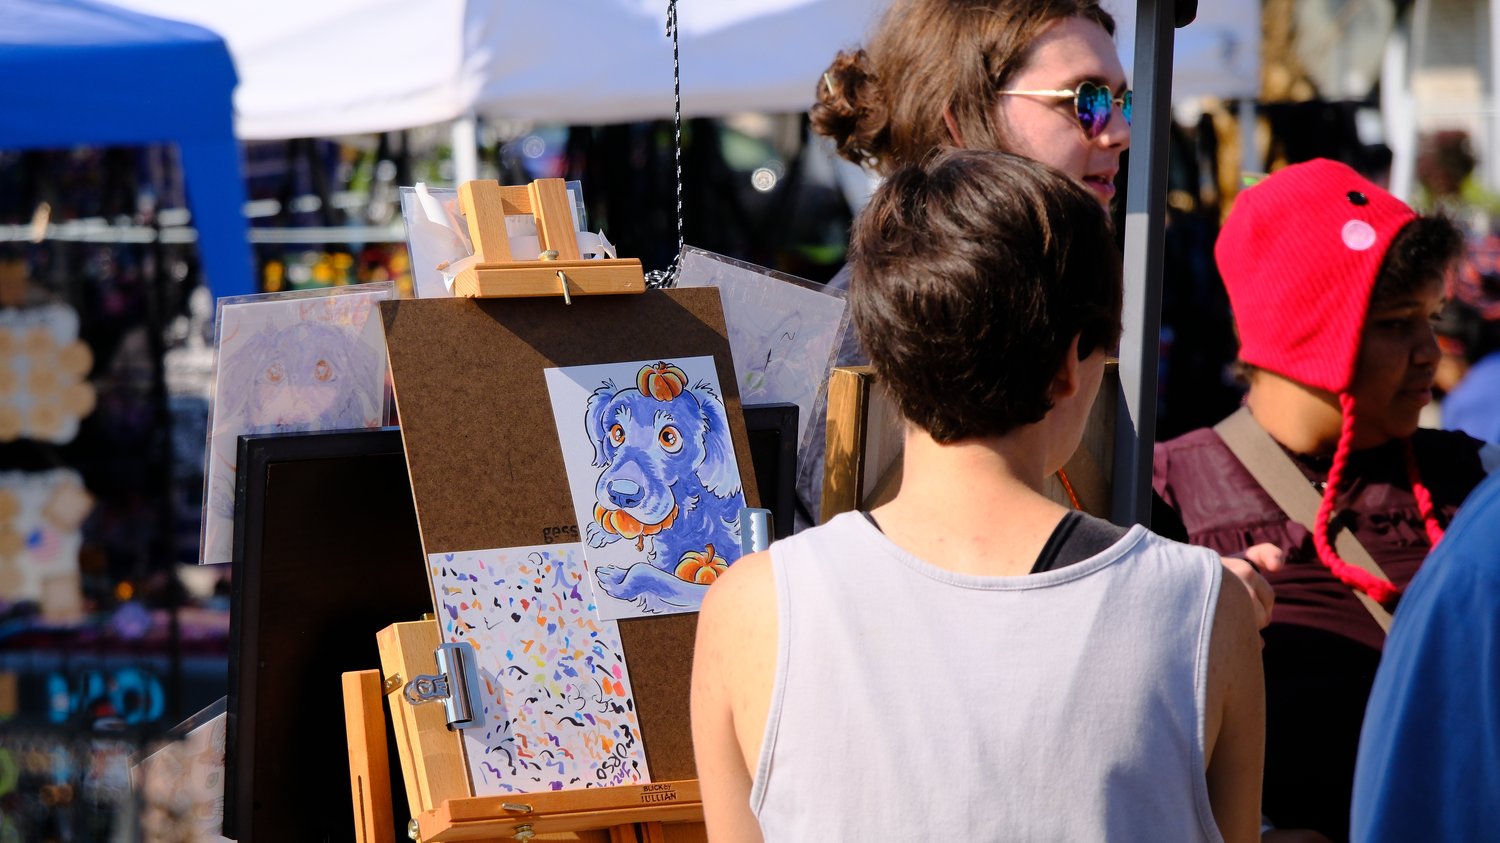 Artist drawing at the farmers market.